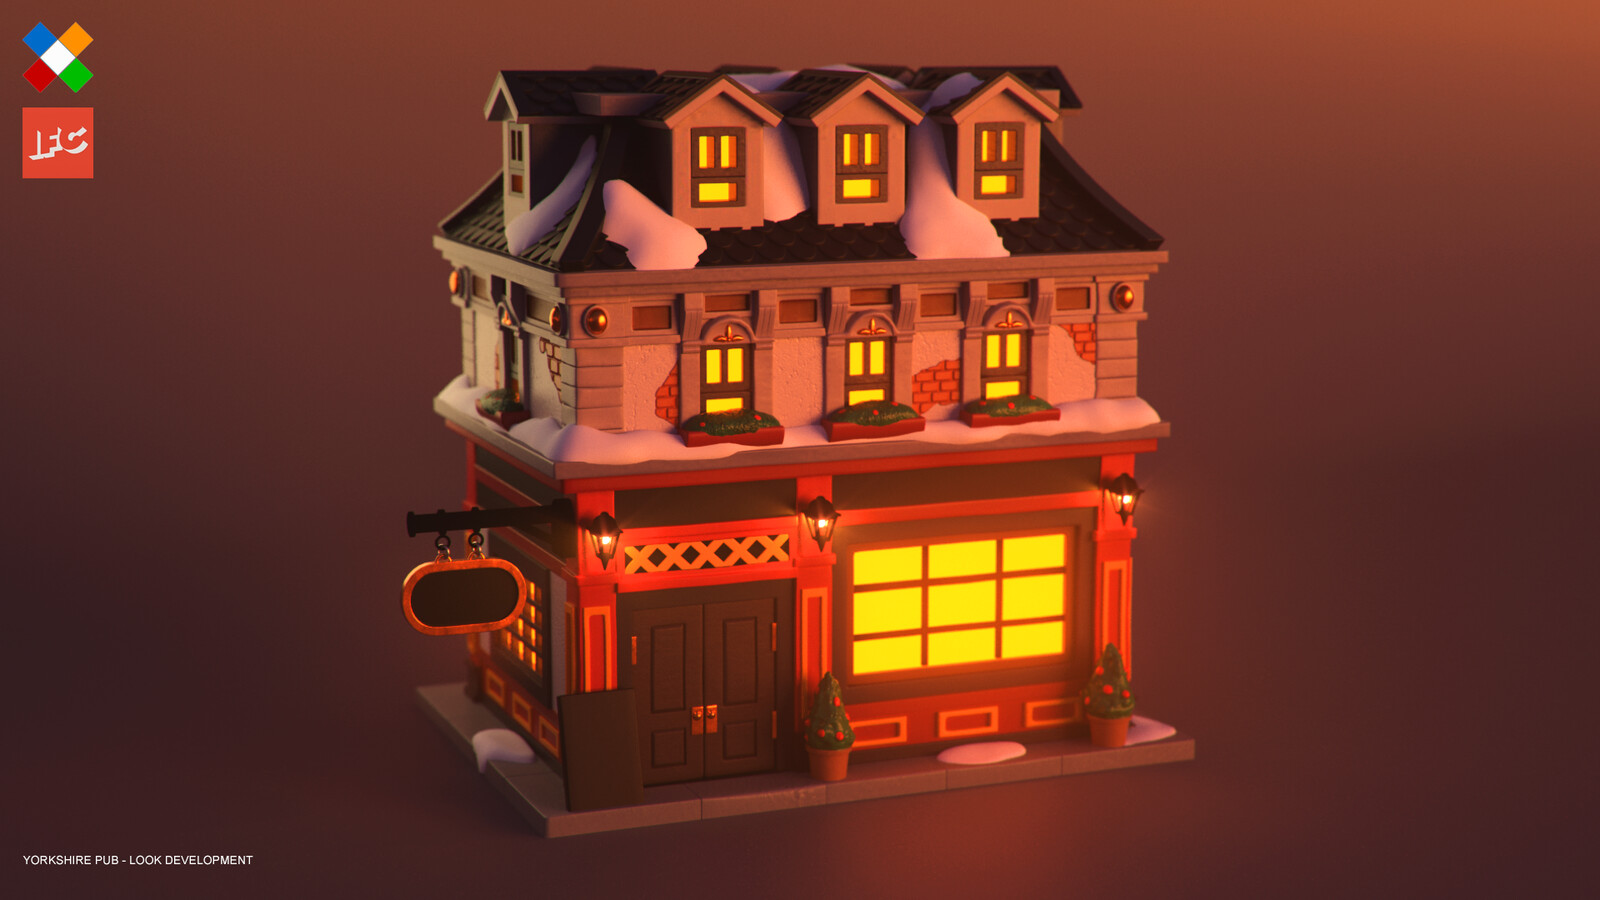 Look Development done for the Yorkshire Pub model